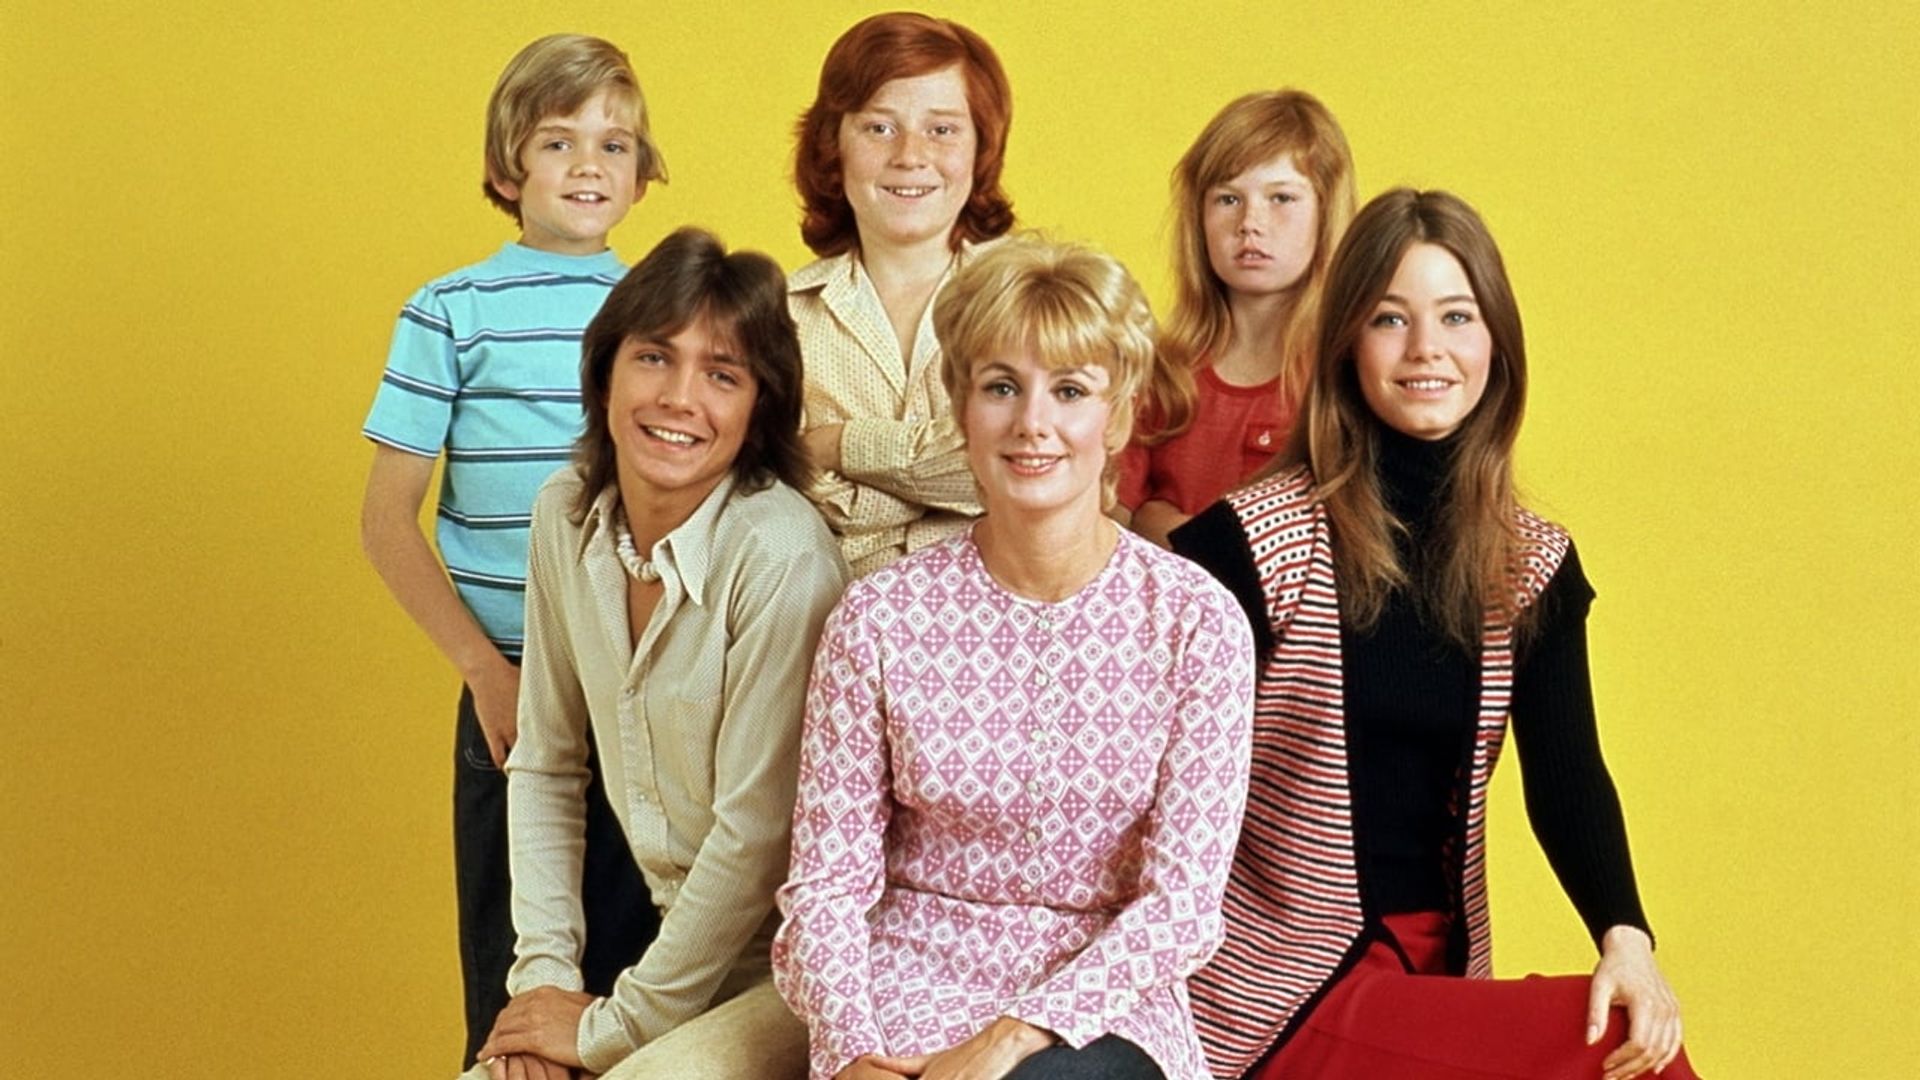 The Partridge Family background